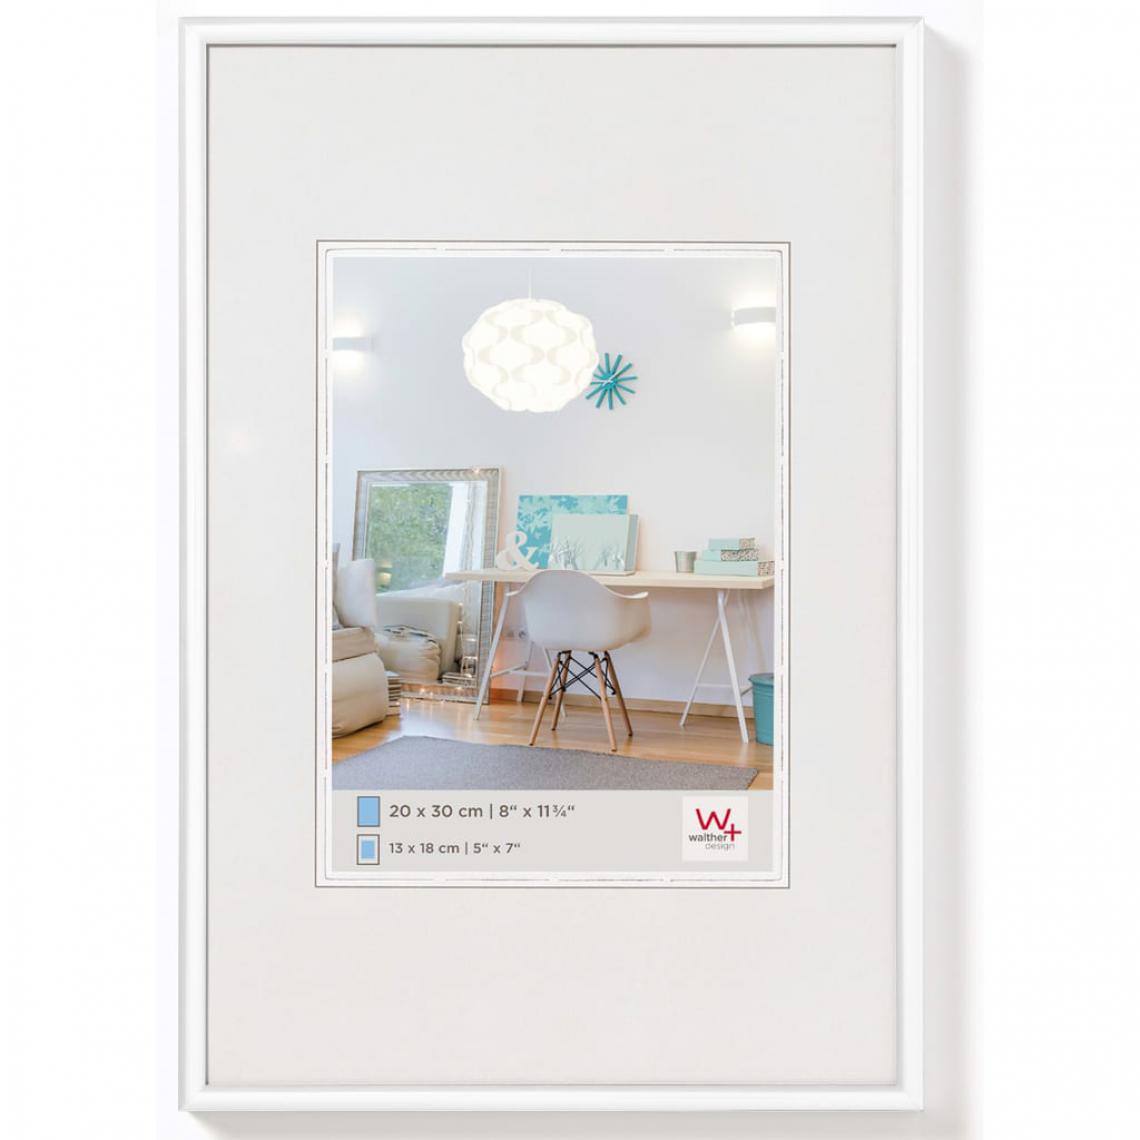 Walther - Walther Design Cadre photo New Lifestyle 60x90 cm Blanc - Cadres, pêle-mêle